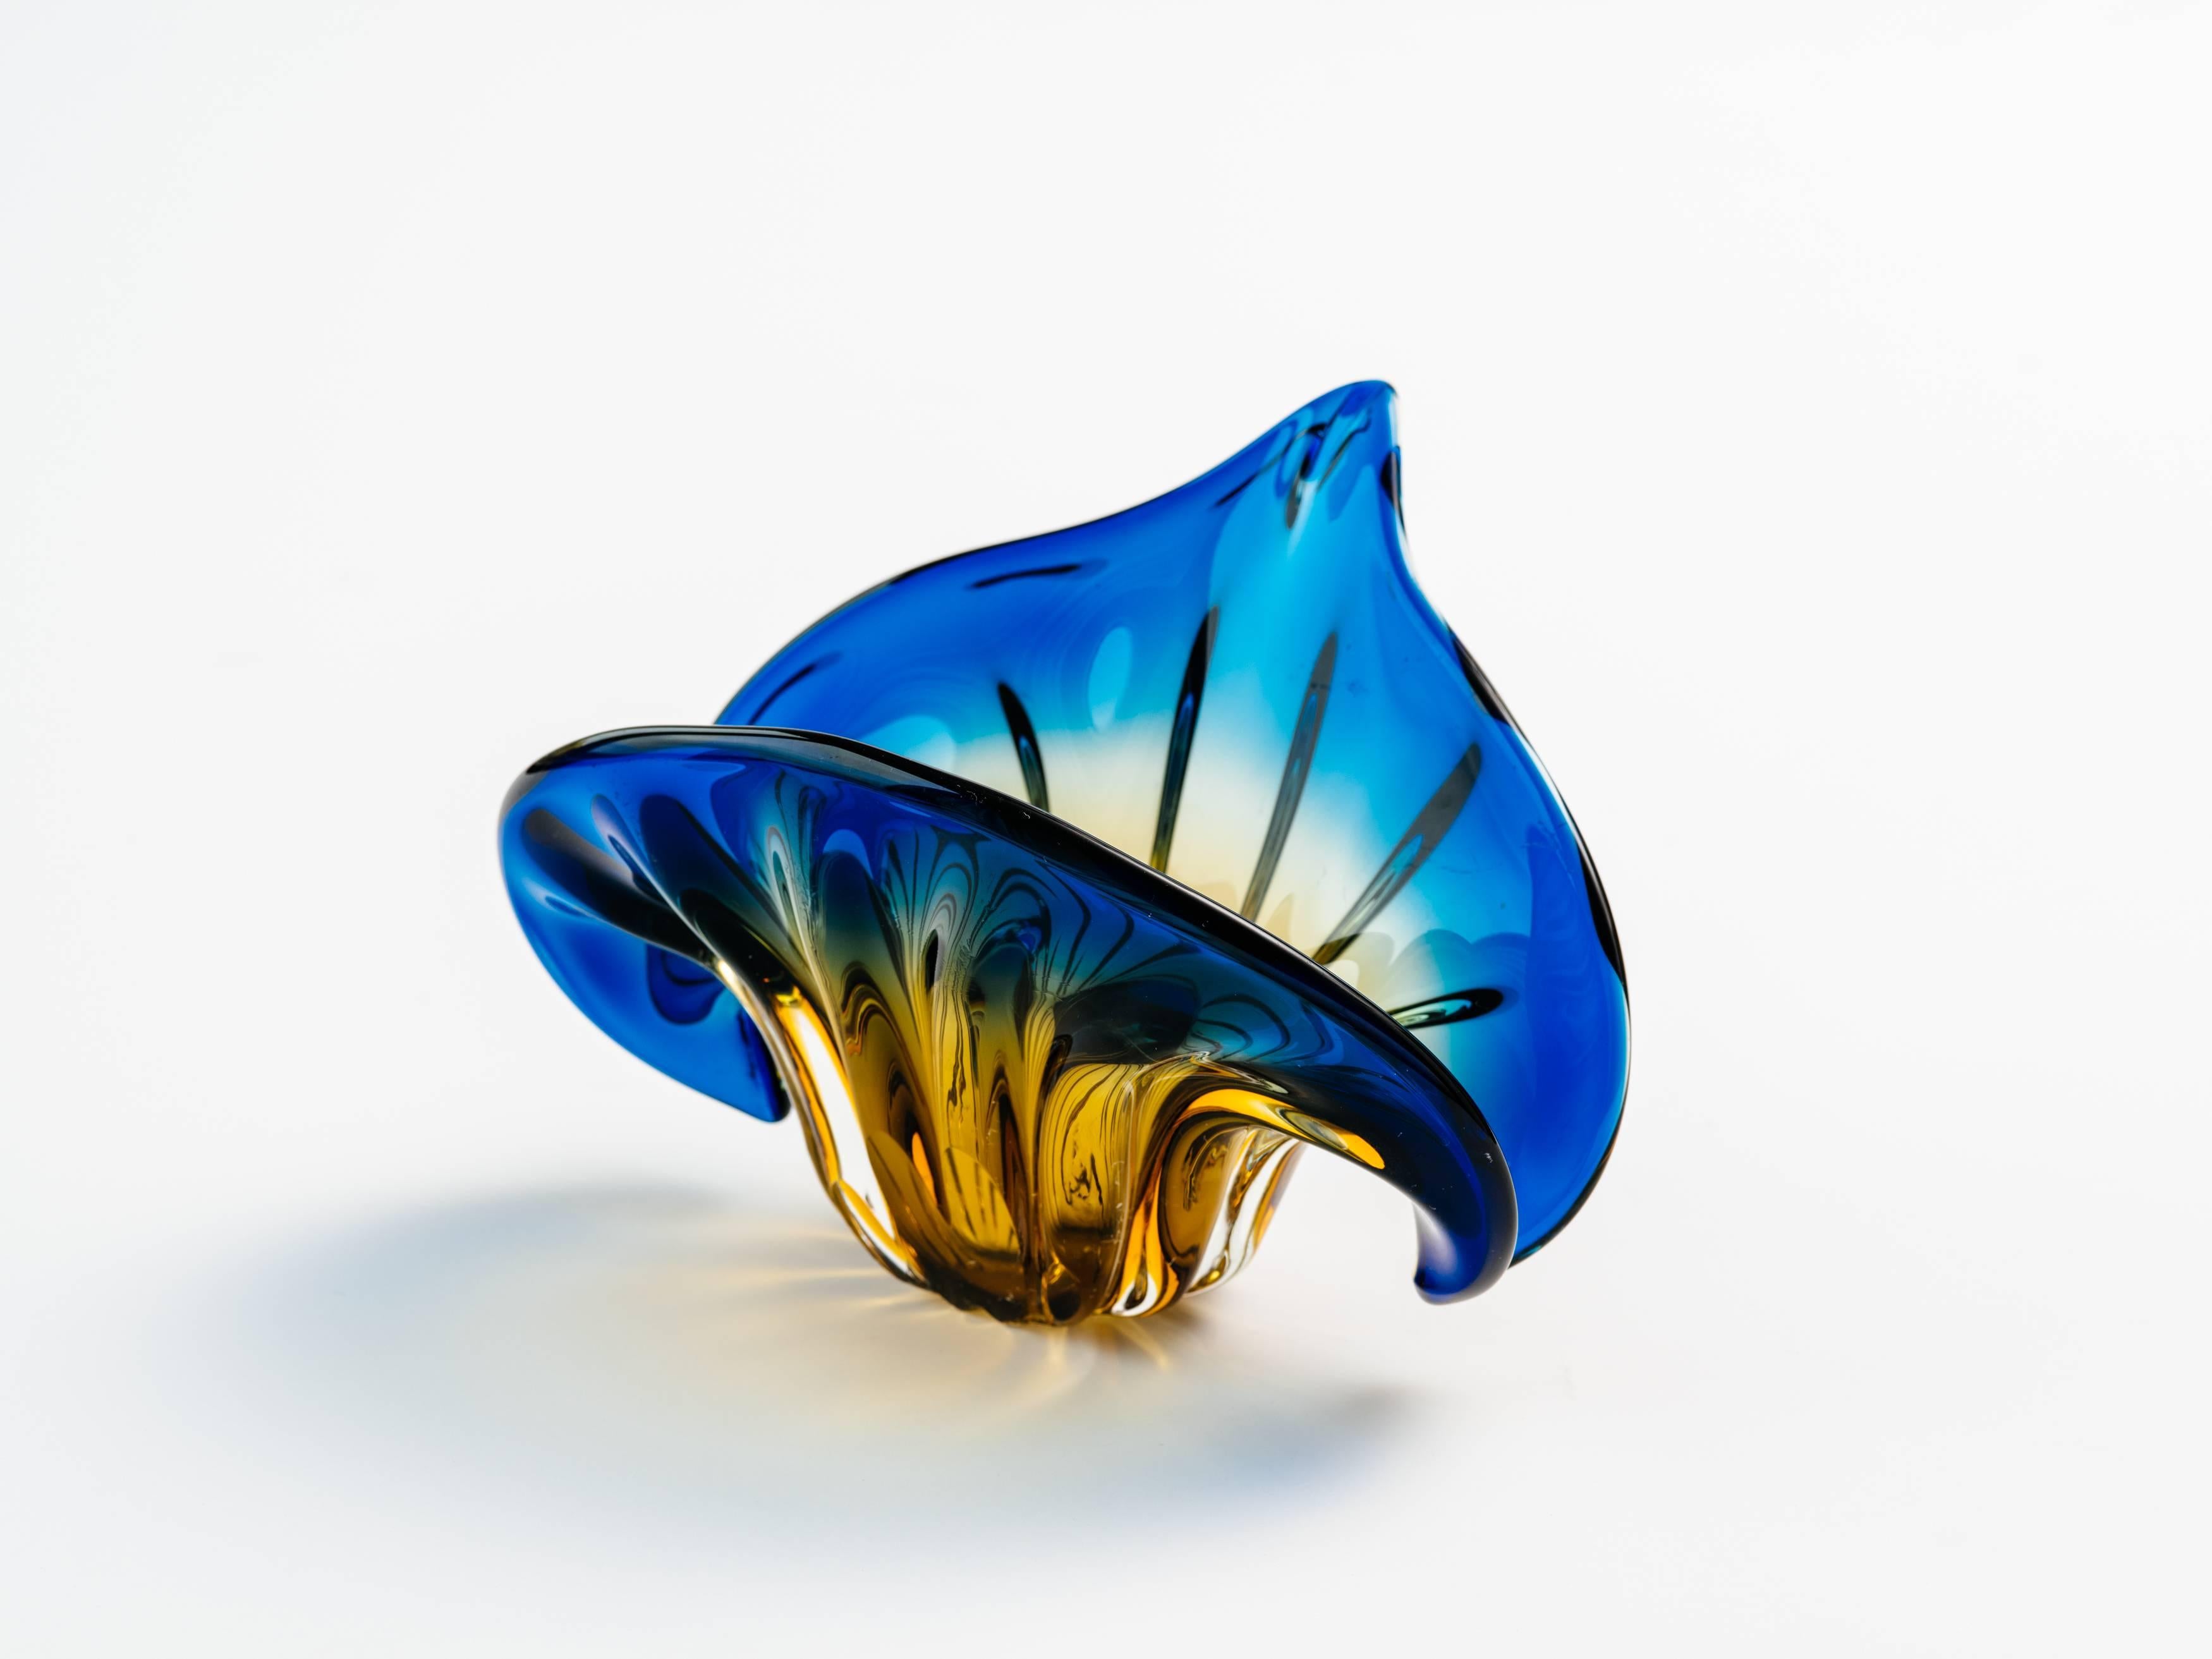 French Art Deco bowl or vase comprised of handblown Murano glass in gradient colors of marigold yellow, amber, and royal blue. The vase has a fleur-de-lis or flower of the lily design. It features fluted accents with winged sides and tapered tip